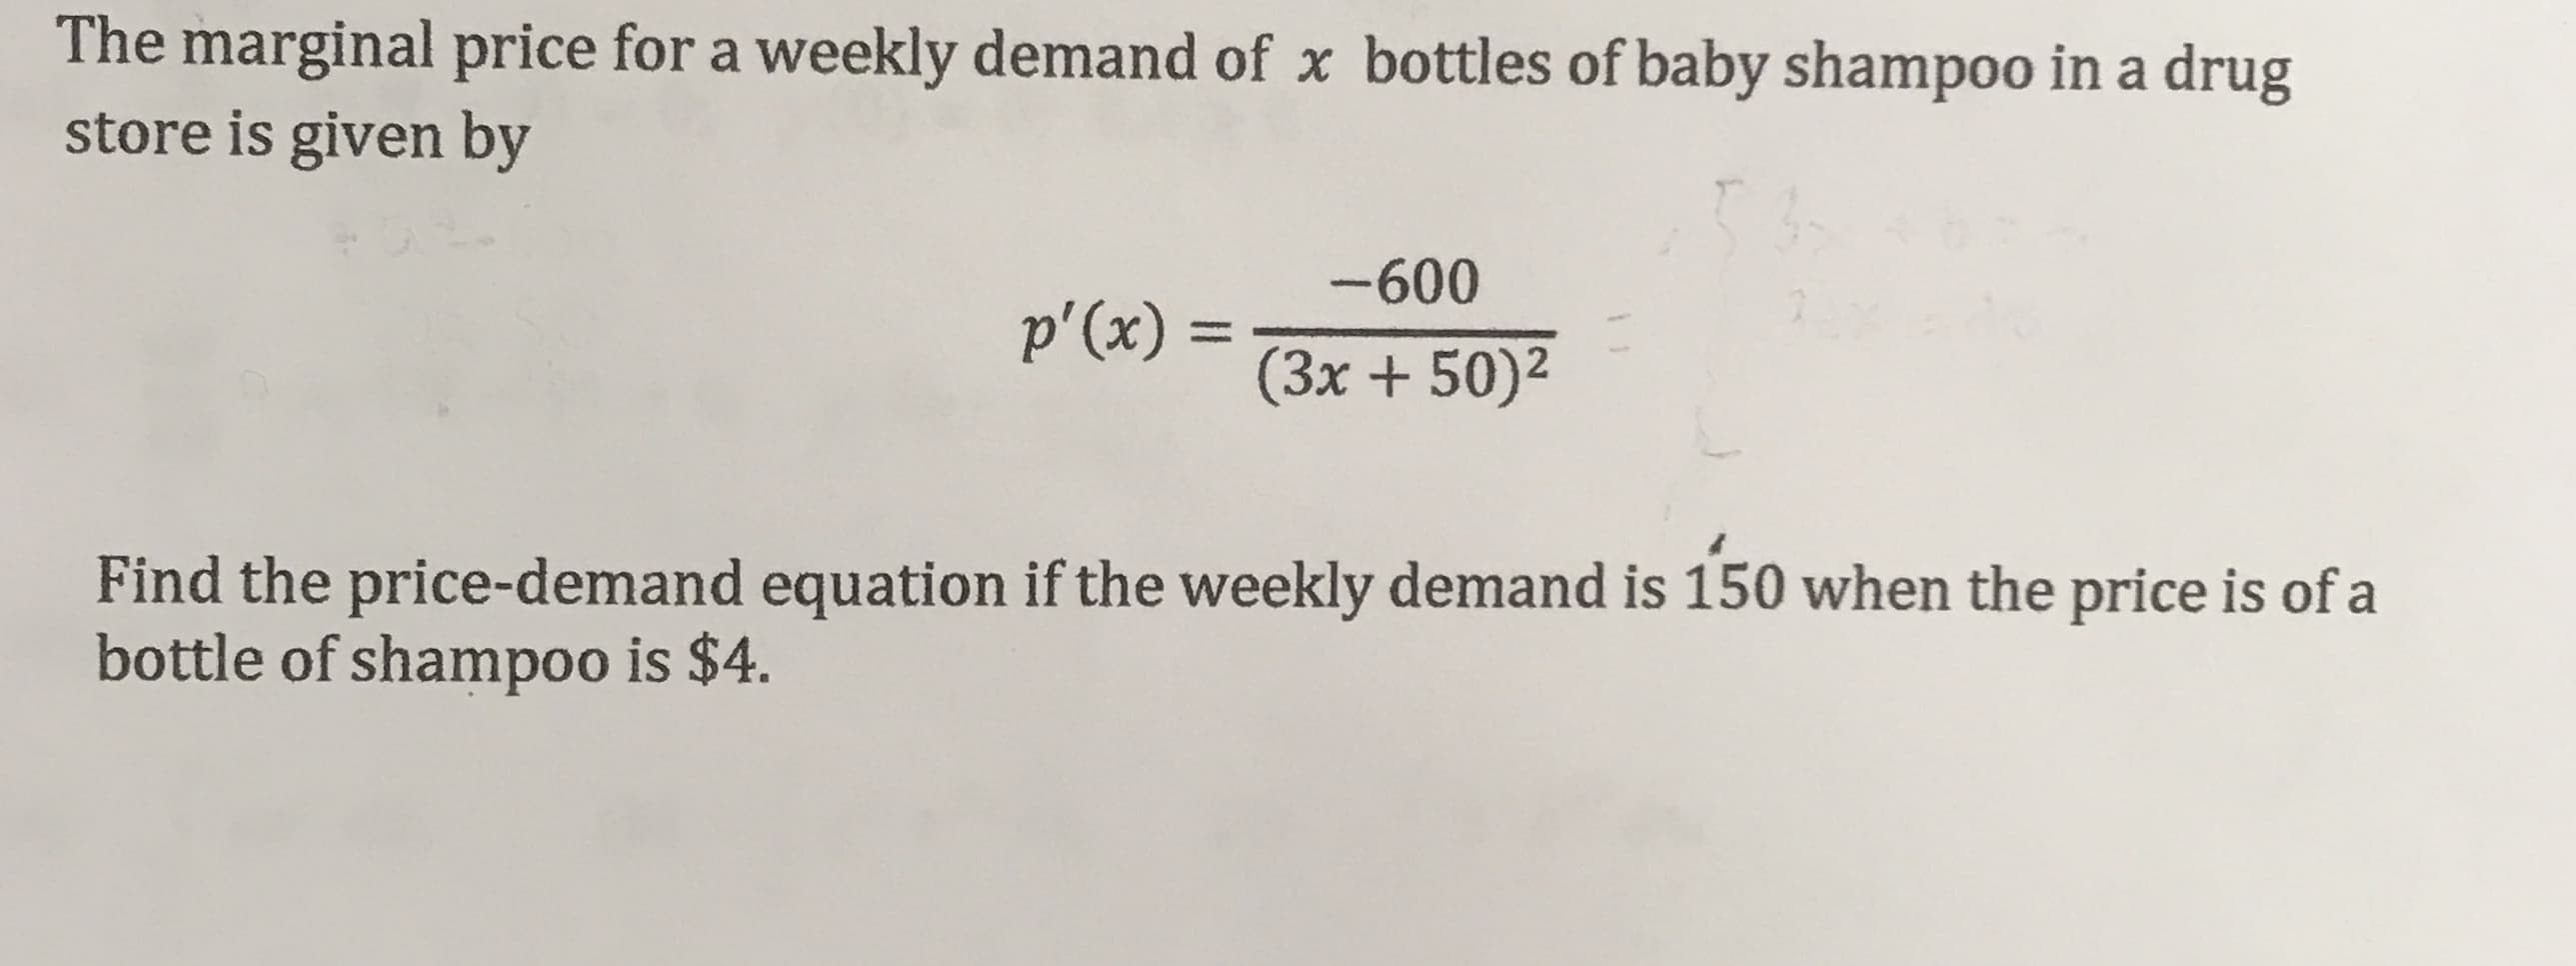 The marginal price for a weekly demand of x bottles of baby shampoo in a drug
store is given by
P'(x)-600
(3x +50)2
Find the price-demand equation if the weekly demand is 150 when the price is of a
bottle of shampoo is $4.
